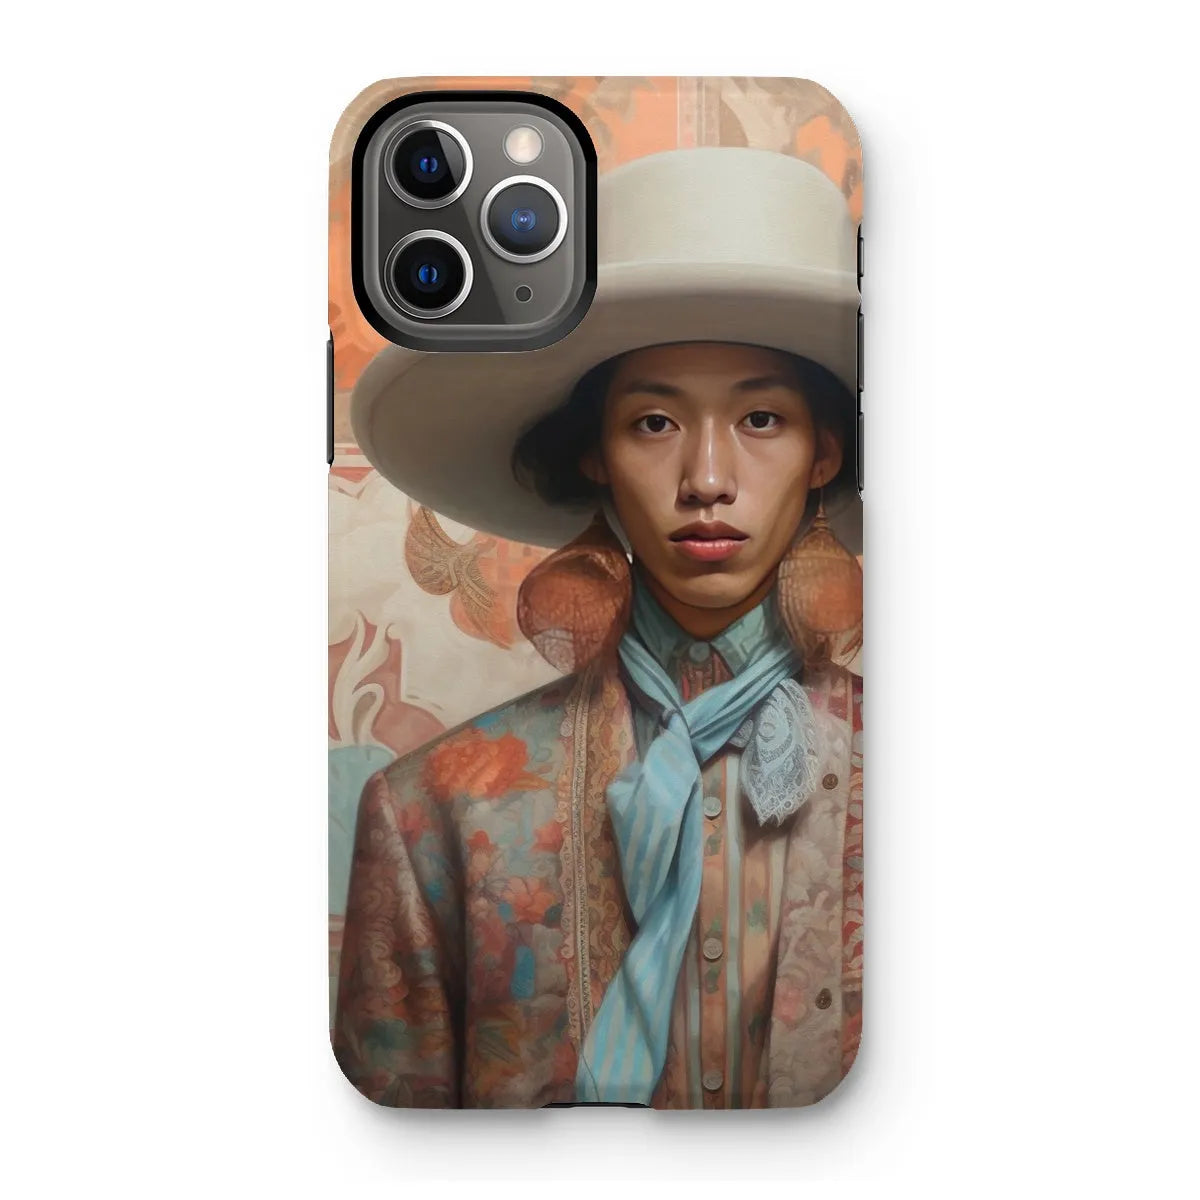 Iyaan The Gay Cowboy - Dandy Gay Aesthetic Art Phone Case - Iphone 11 Pro / Matte - Mobile Phone Cases - Aesthetic Art